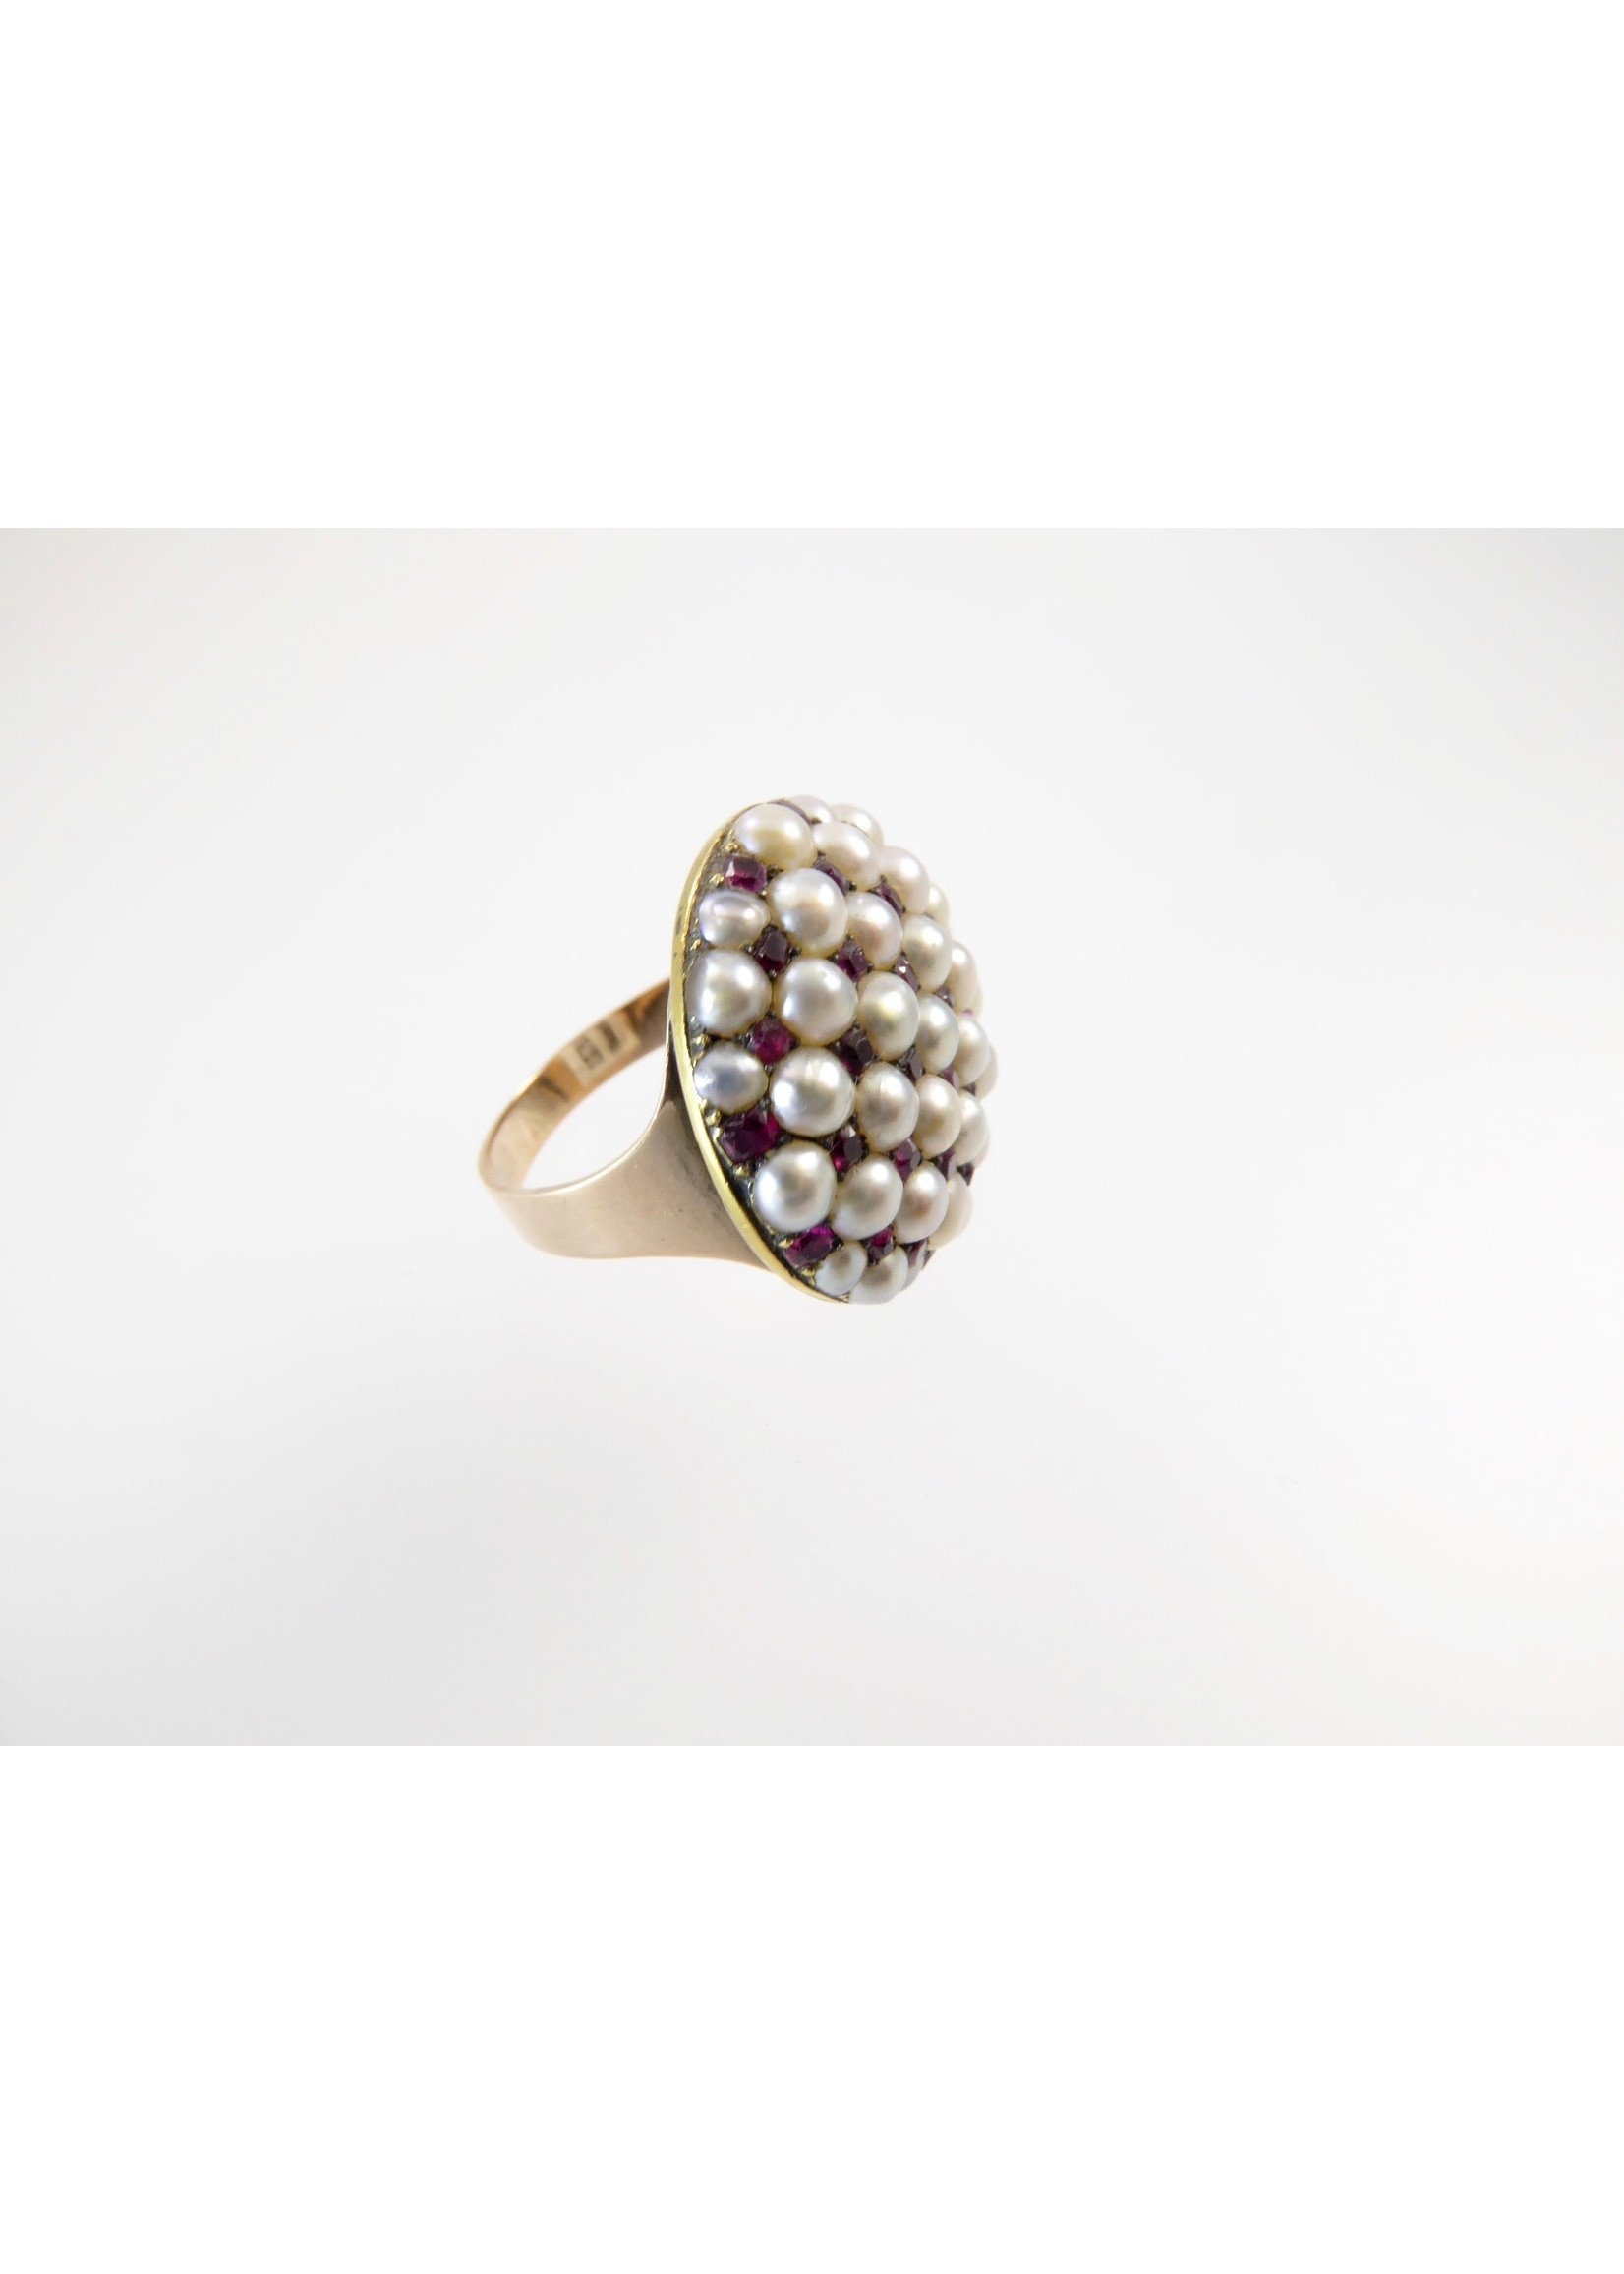 Lisa Kramer Vintage Jewelry Antique Ruby and Pearl Gold Ring